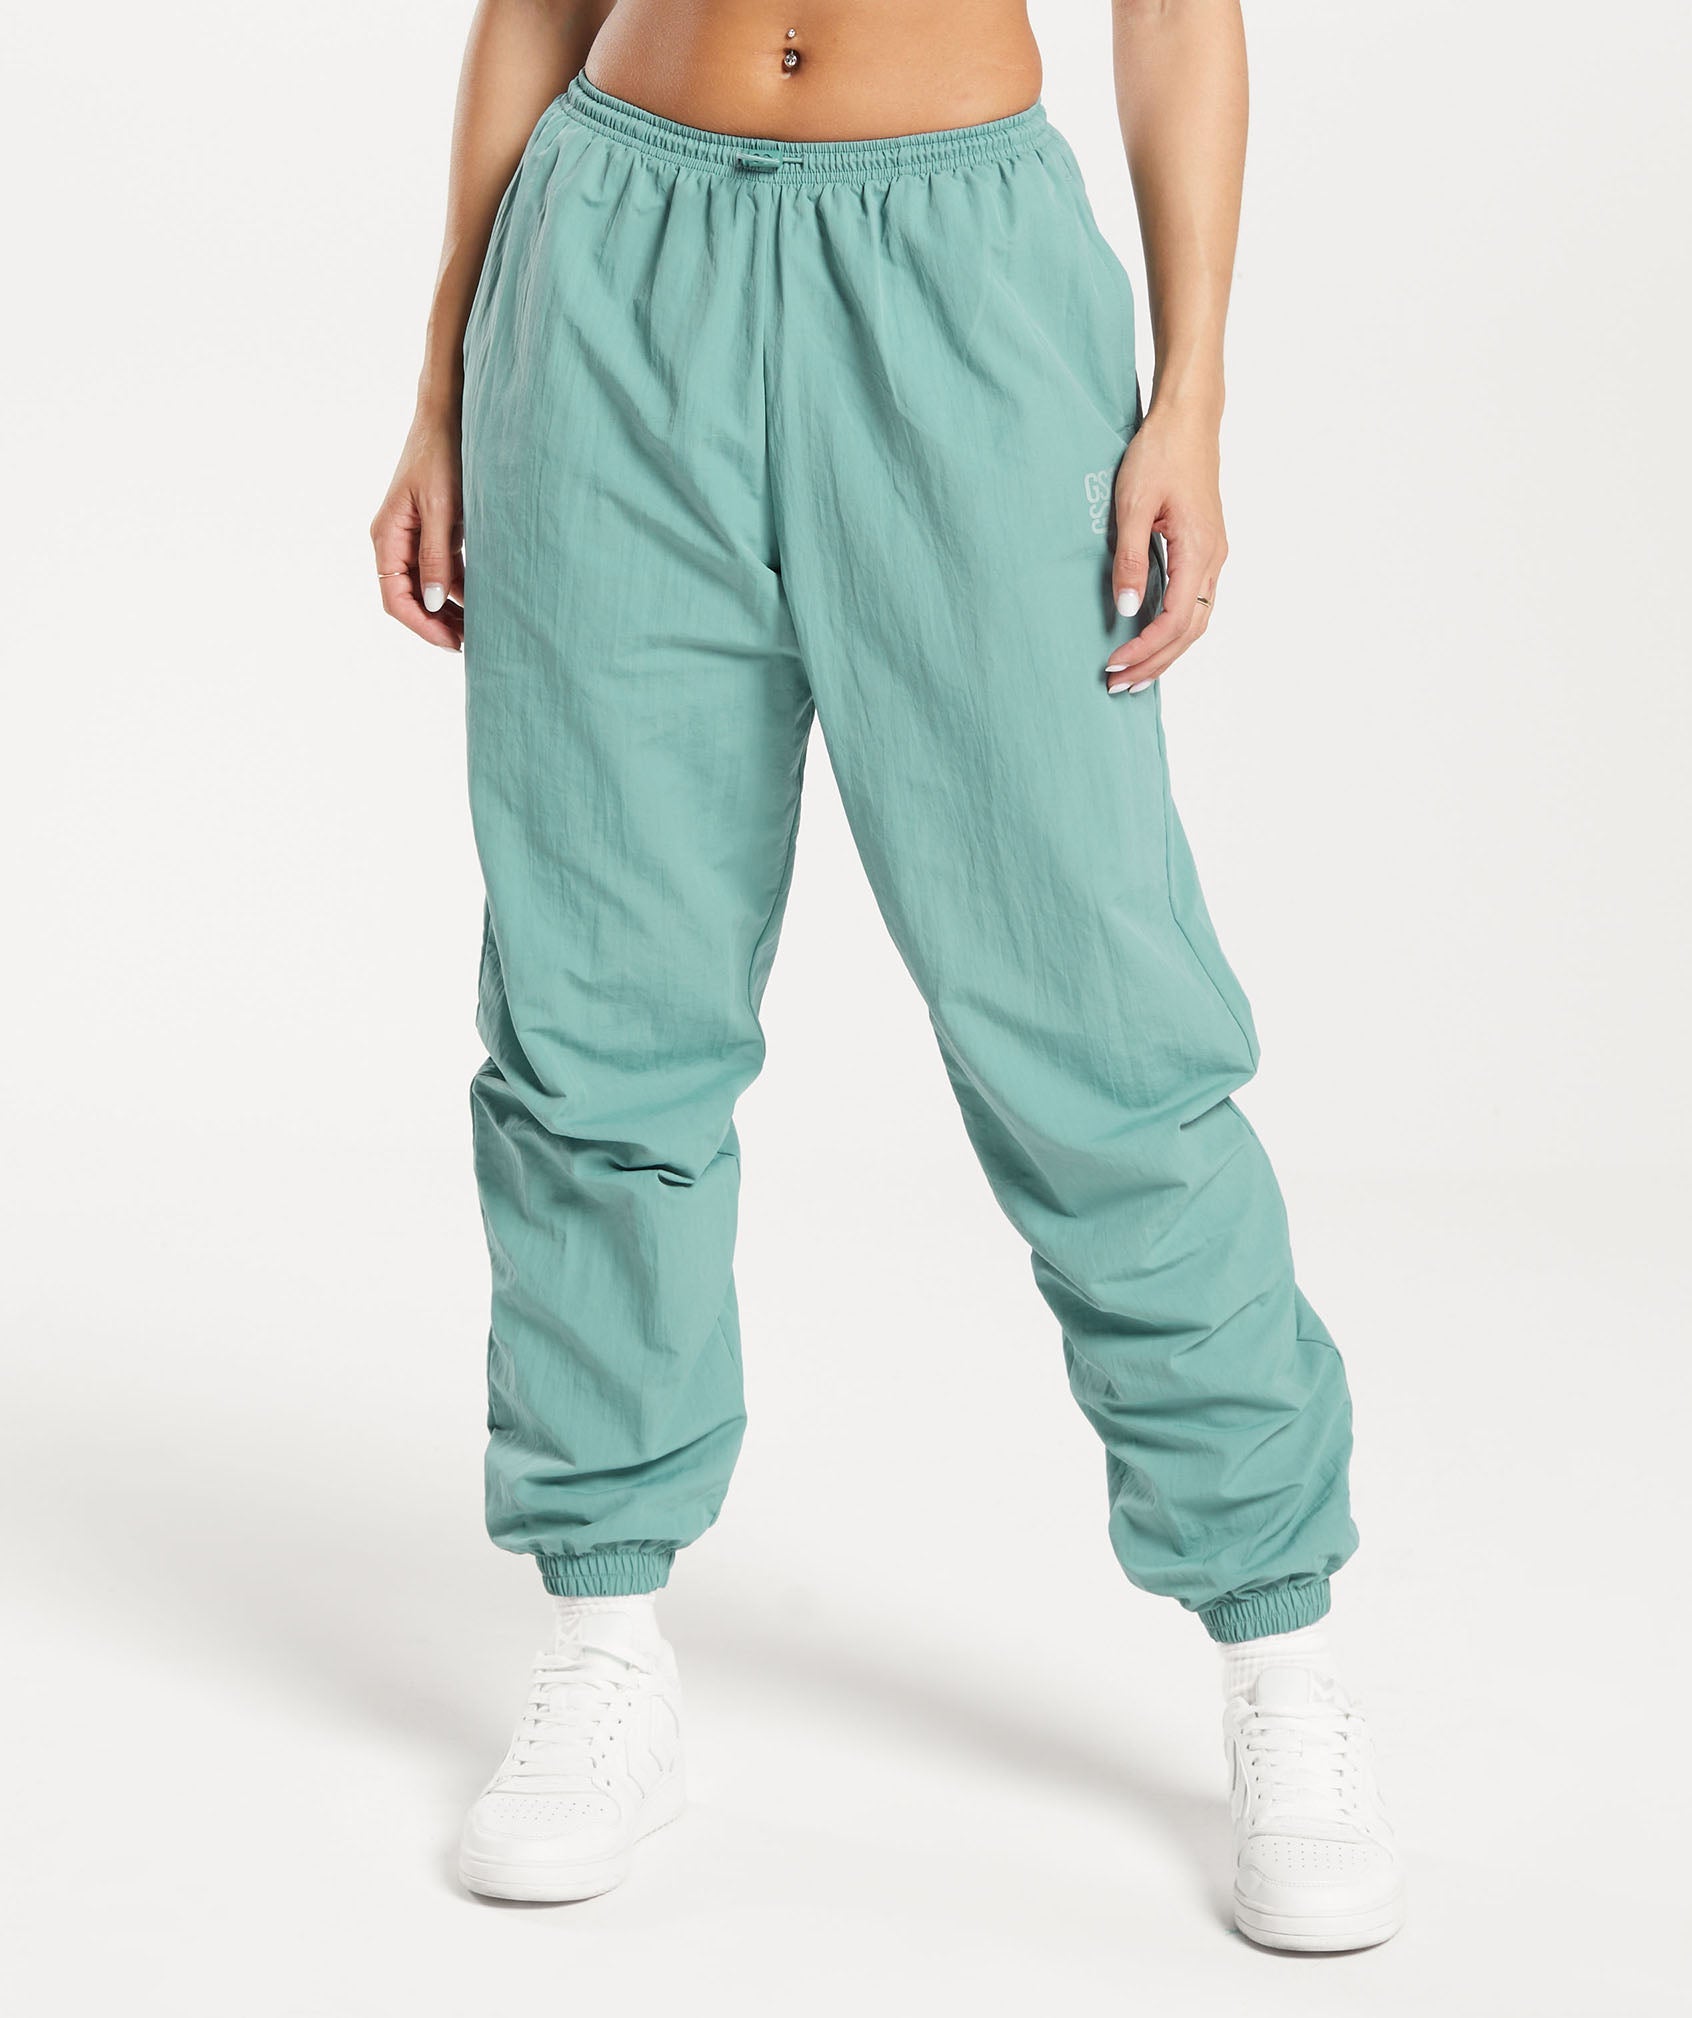 Monogram Woven Joggers in Ink Teal is out of stock